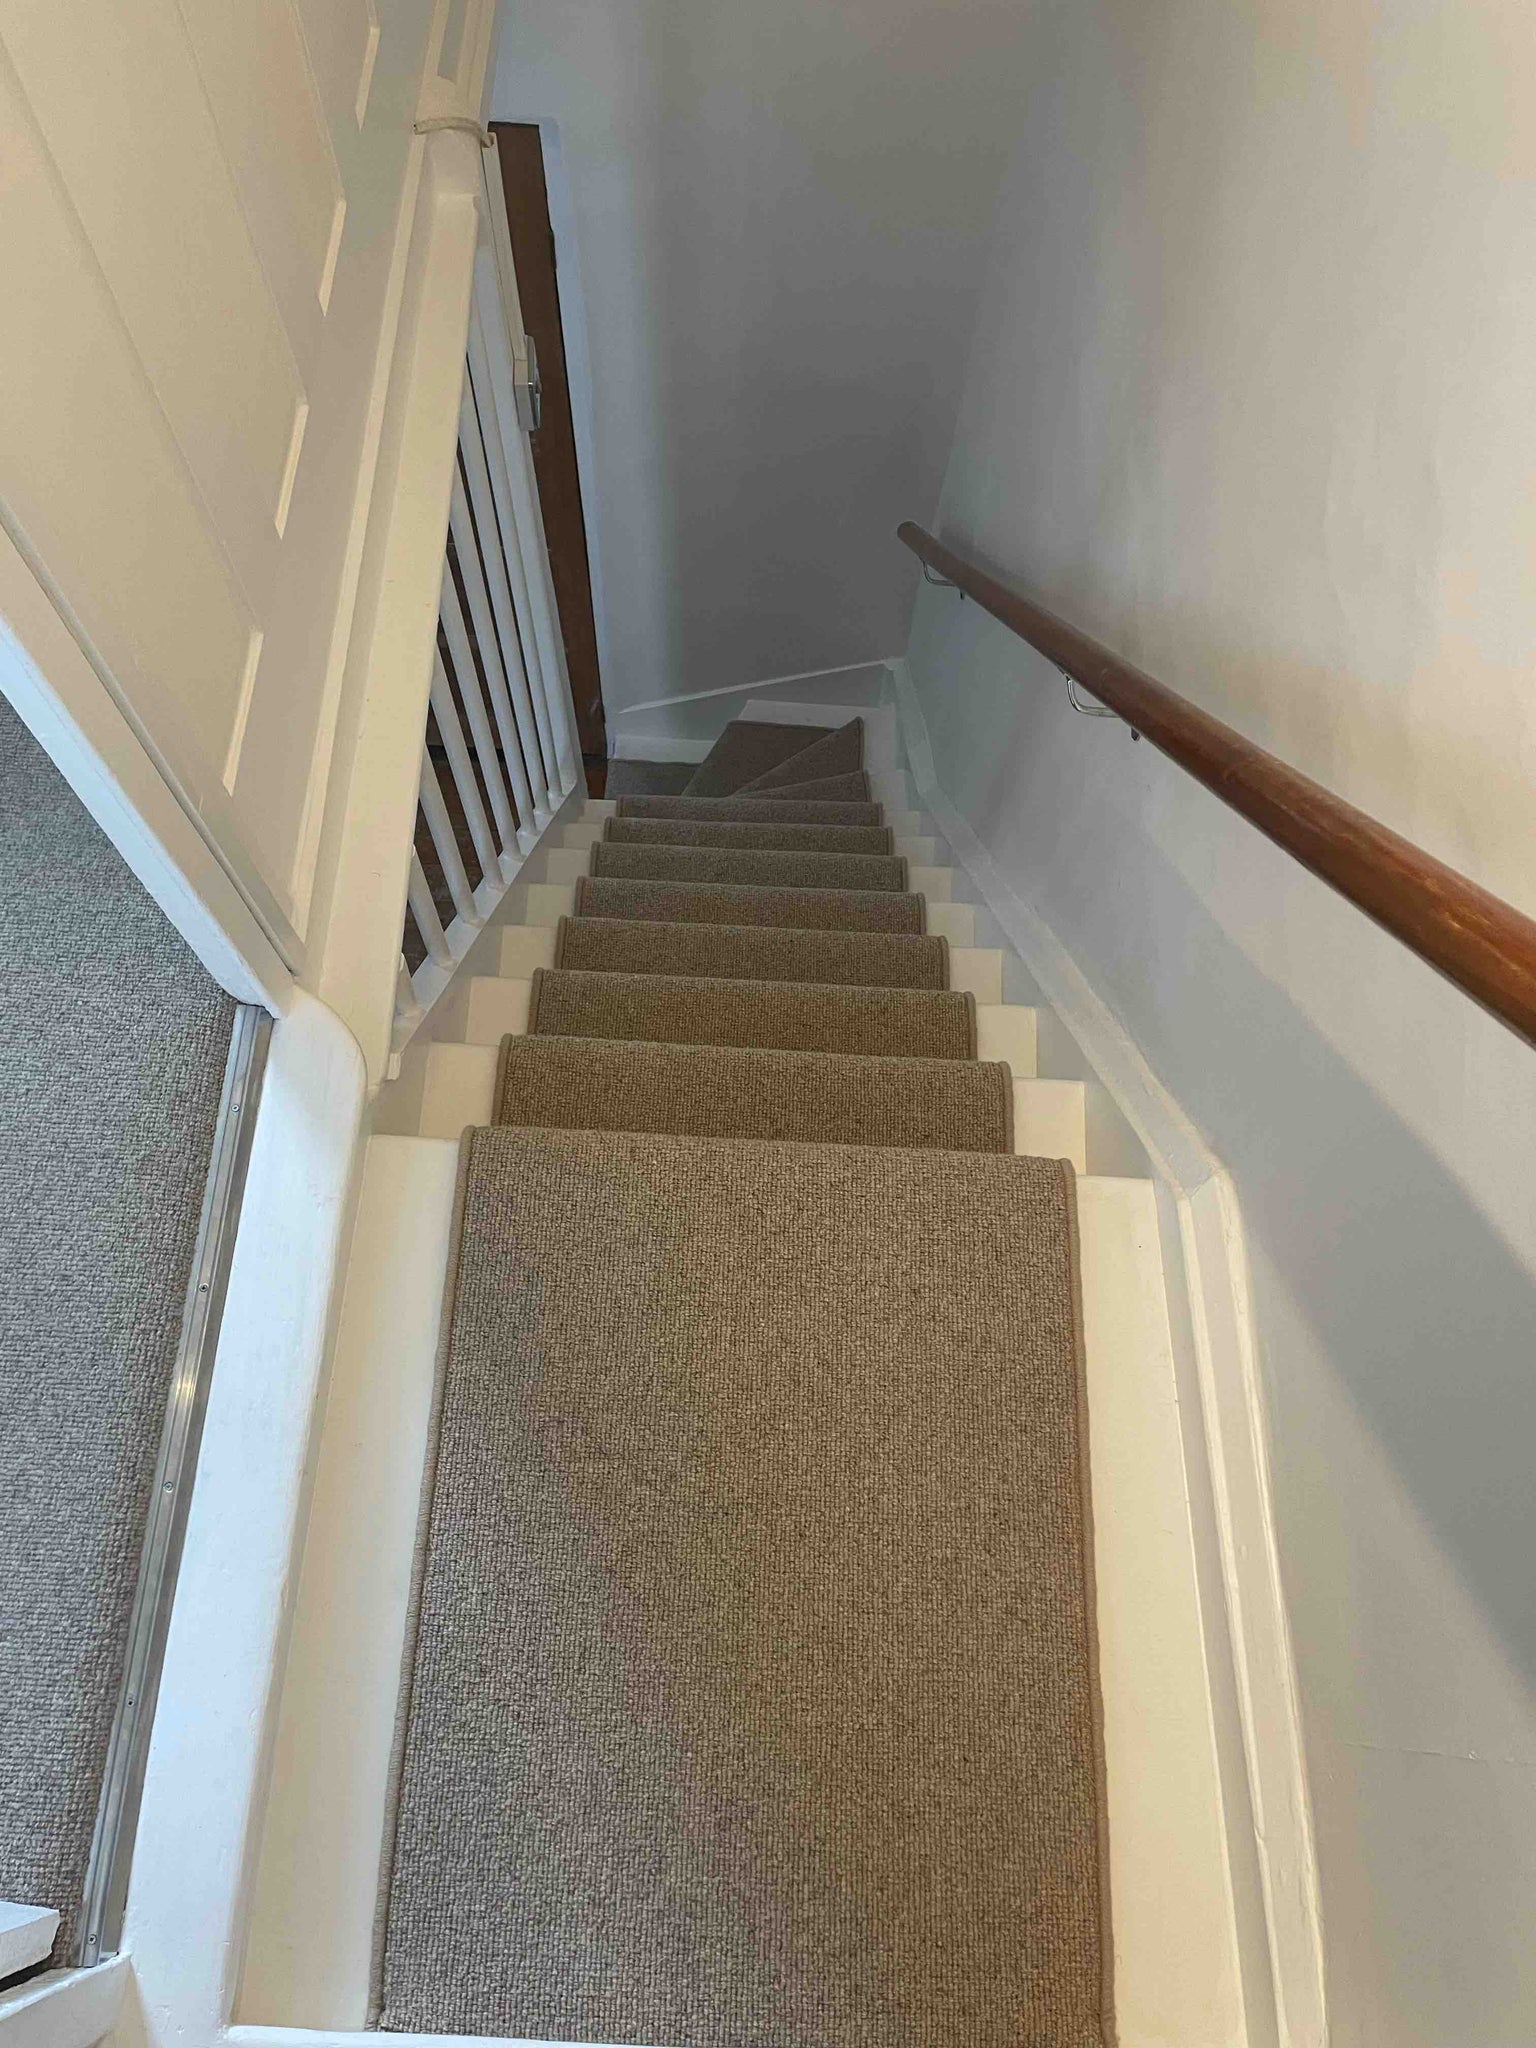 Hand-made stair runners for platforms and landings